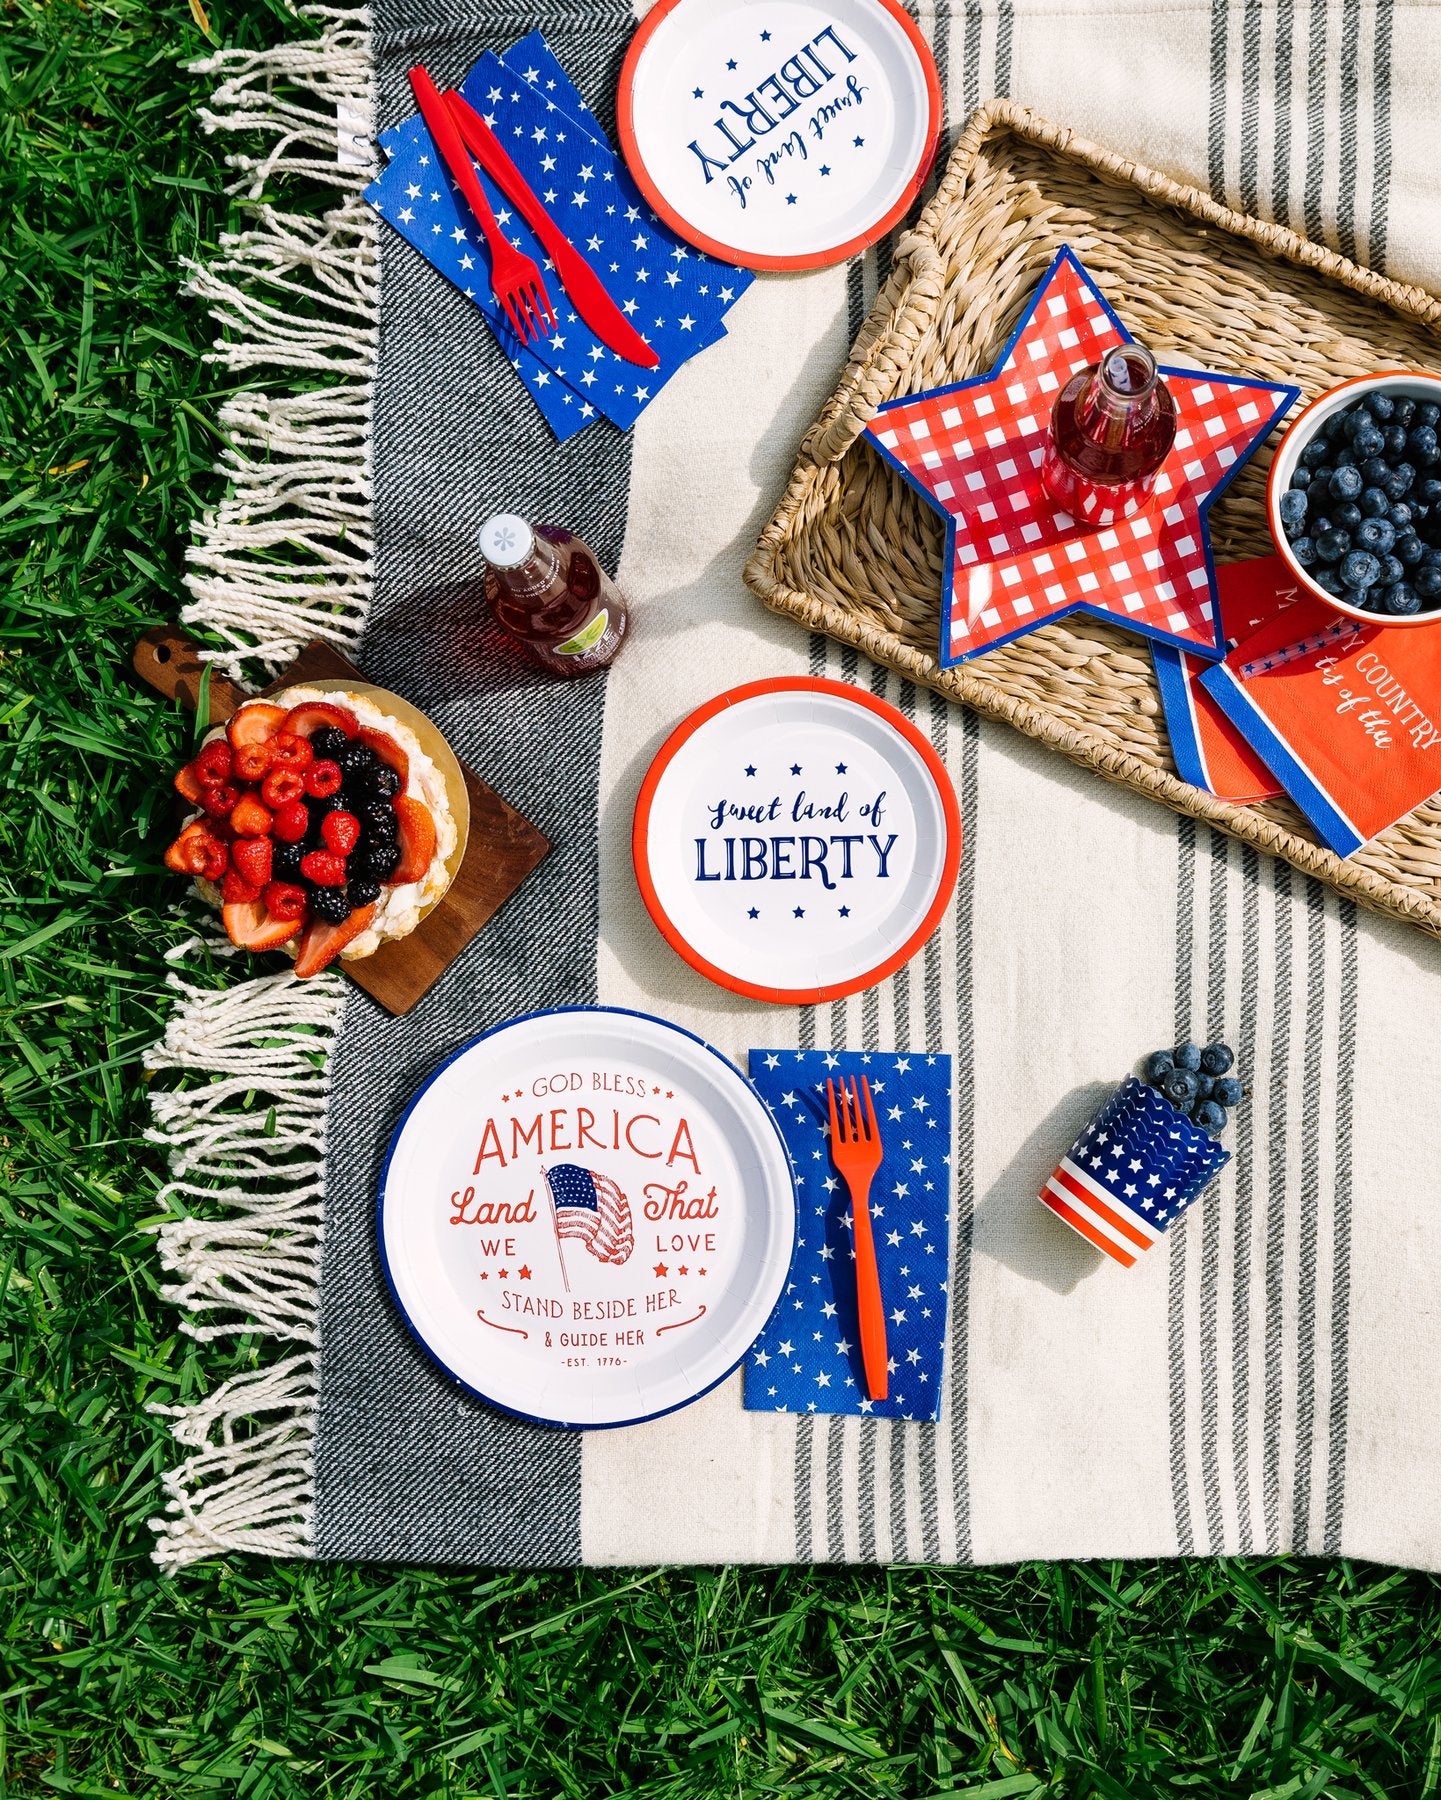 My Country Tis of Thee Cocktail Napkins | The Party Darling